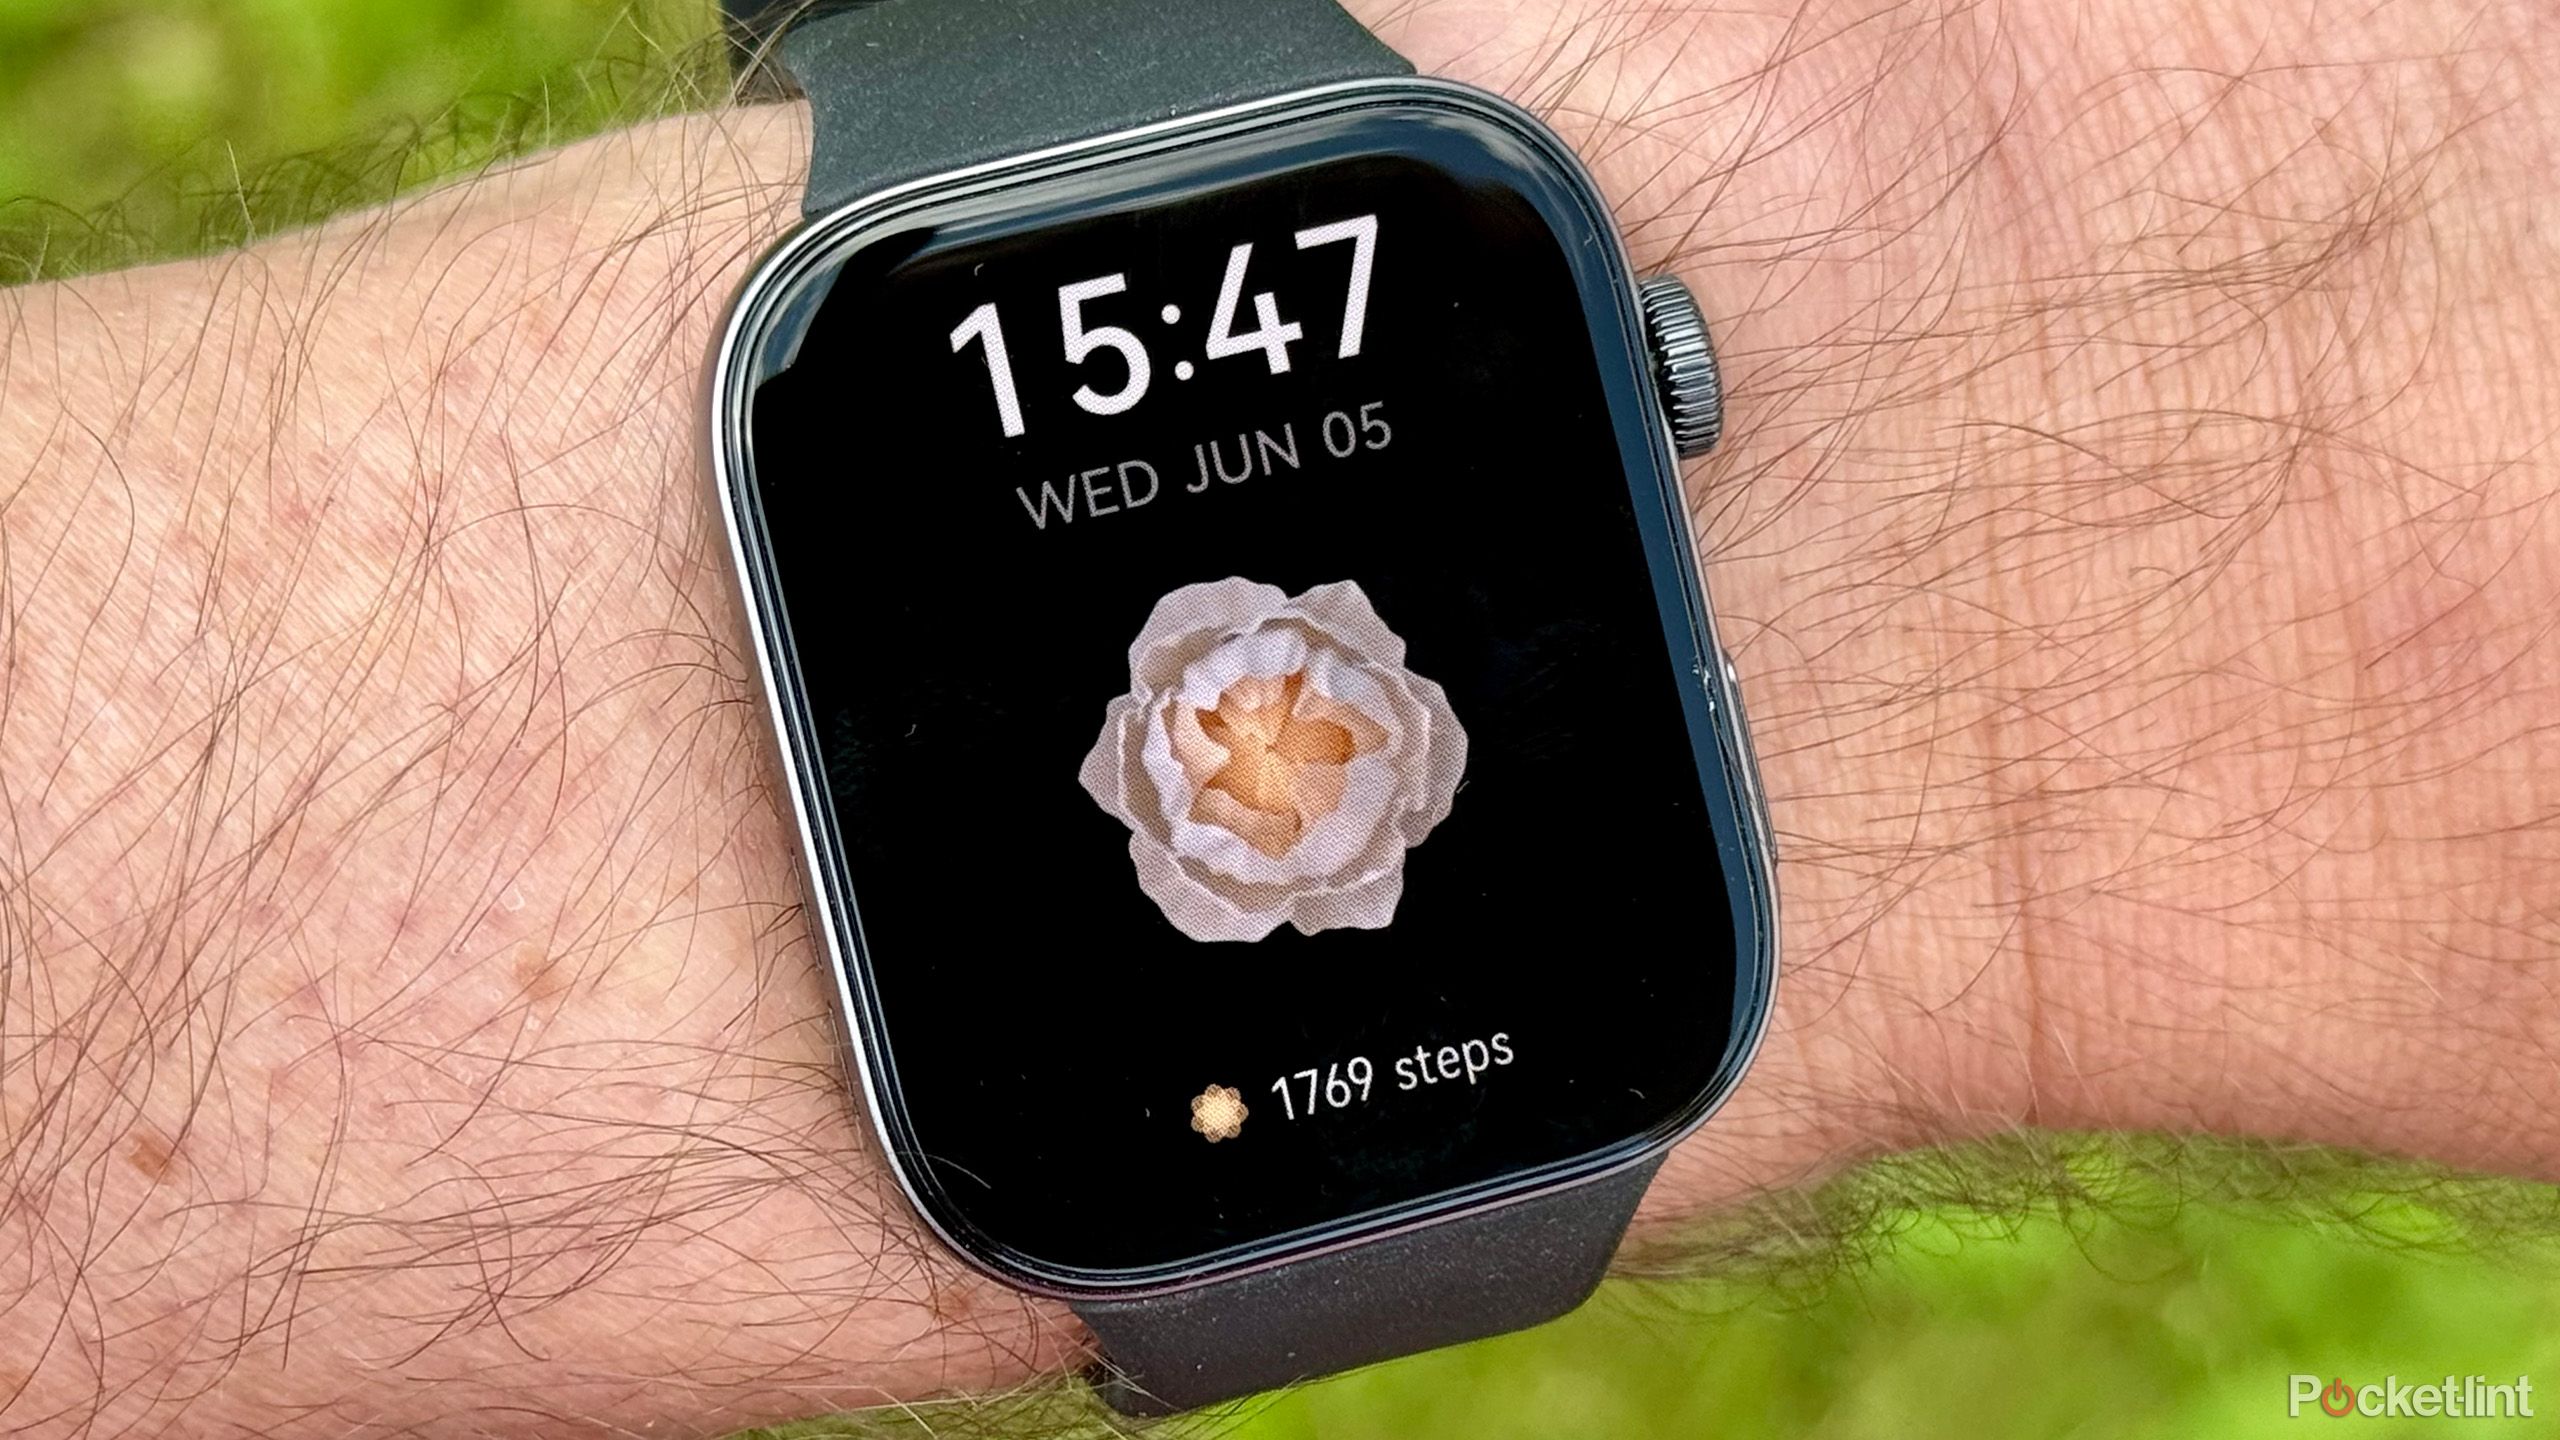 Someone wearing the huawei watch fit 3 with a flower watch face